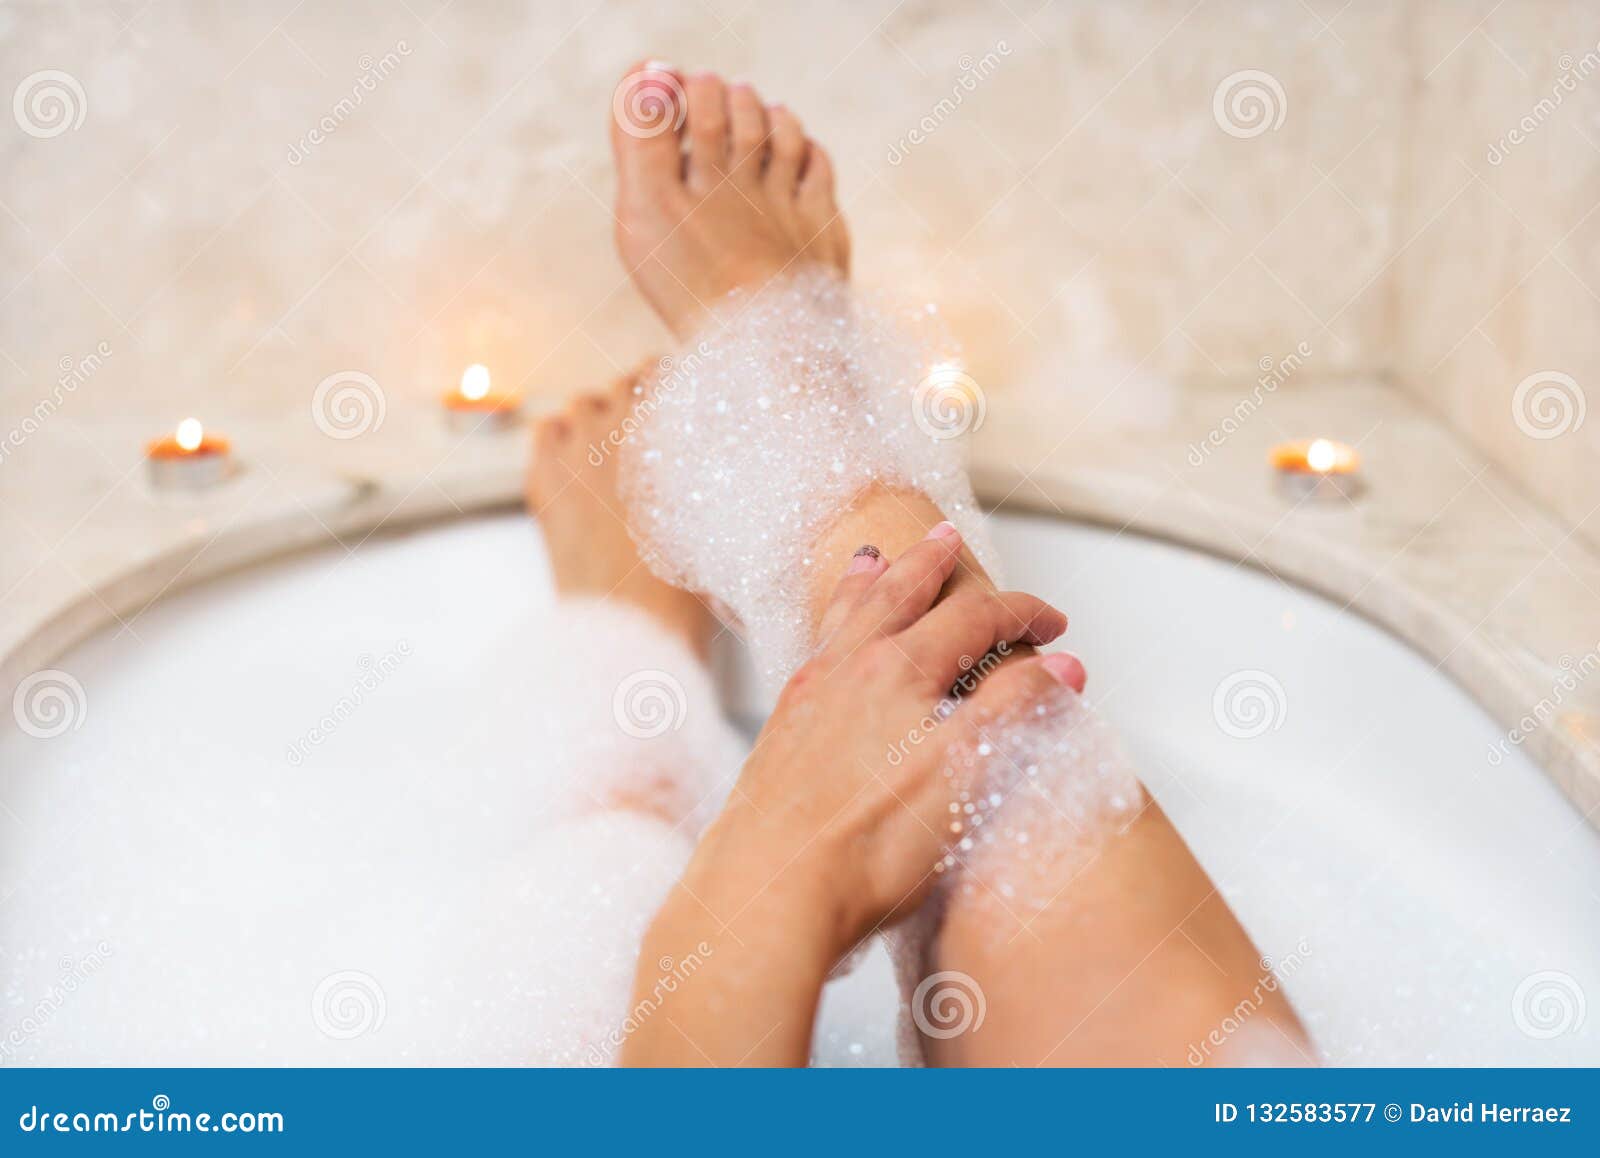 Woman Legs In Bath Foam Relaxation In Spa Stock Image Image Of Clean Girl 132583577